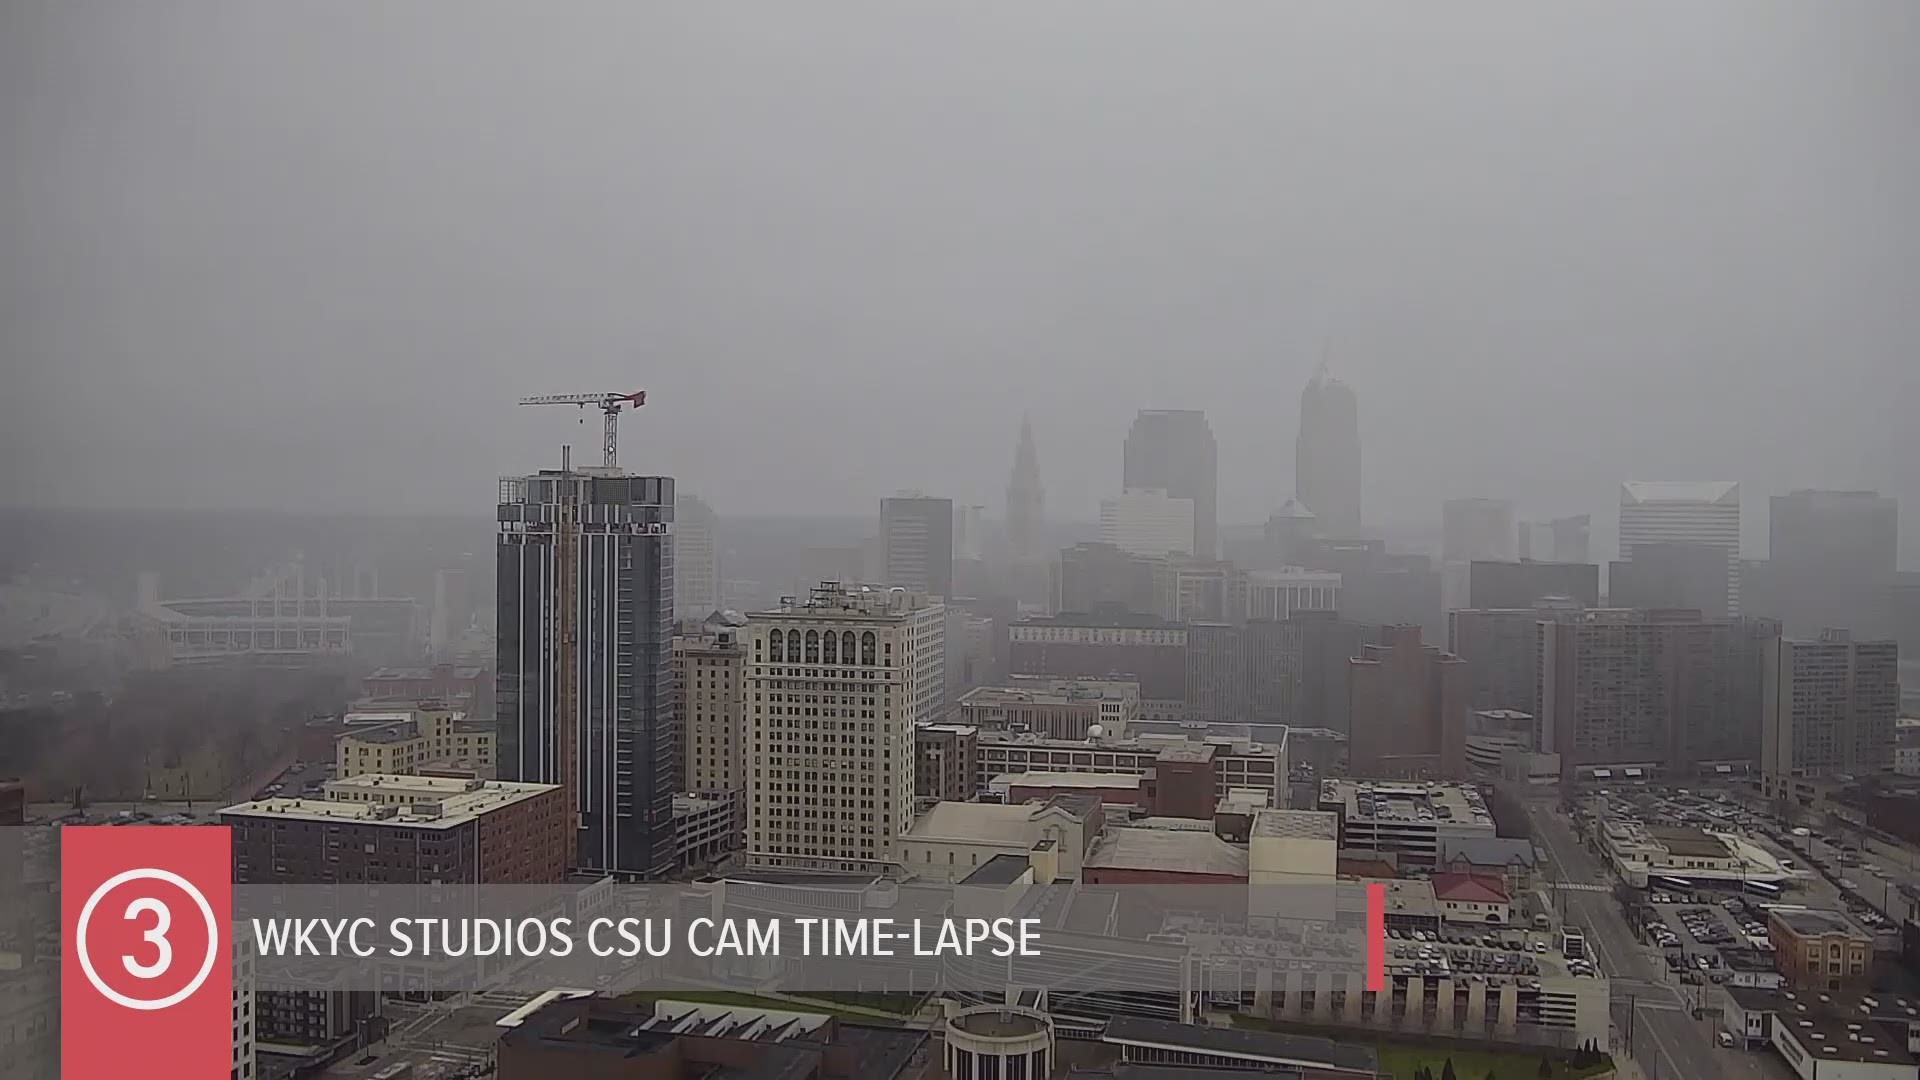 Take :30 seconds and enjoy our Thursday weather time-lapse showing a few flakes of snow in the air this afternoon as seen from the WKYC Studios CSU Cam. #3weather